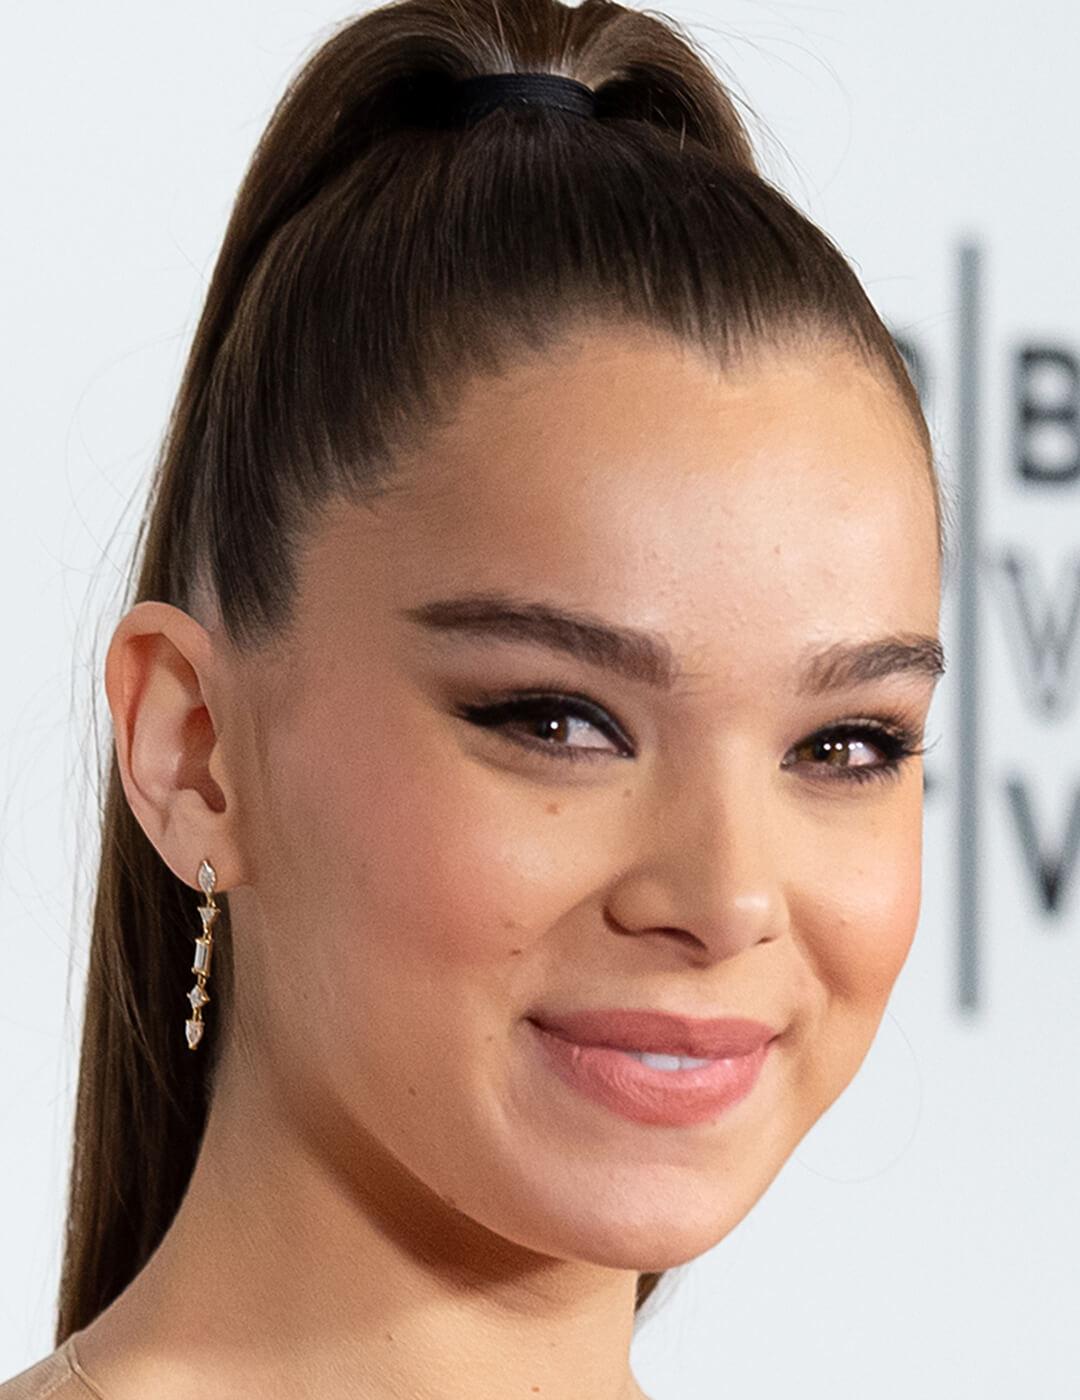 Hailee Steinfeld rocking a high ponytail hairstyle, cat eye makeup look, and nude lips